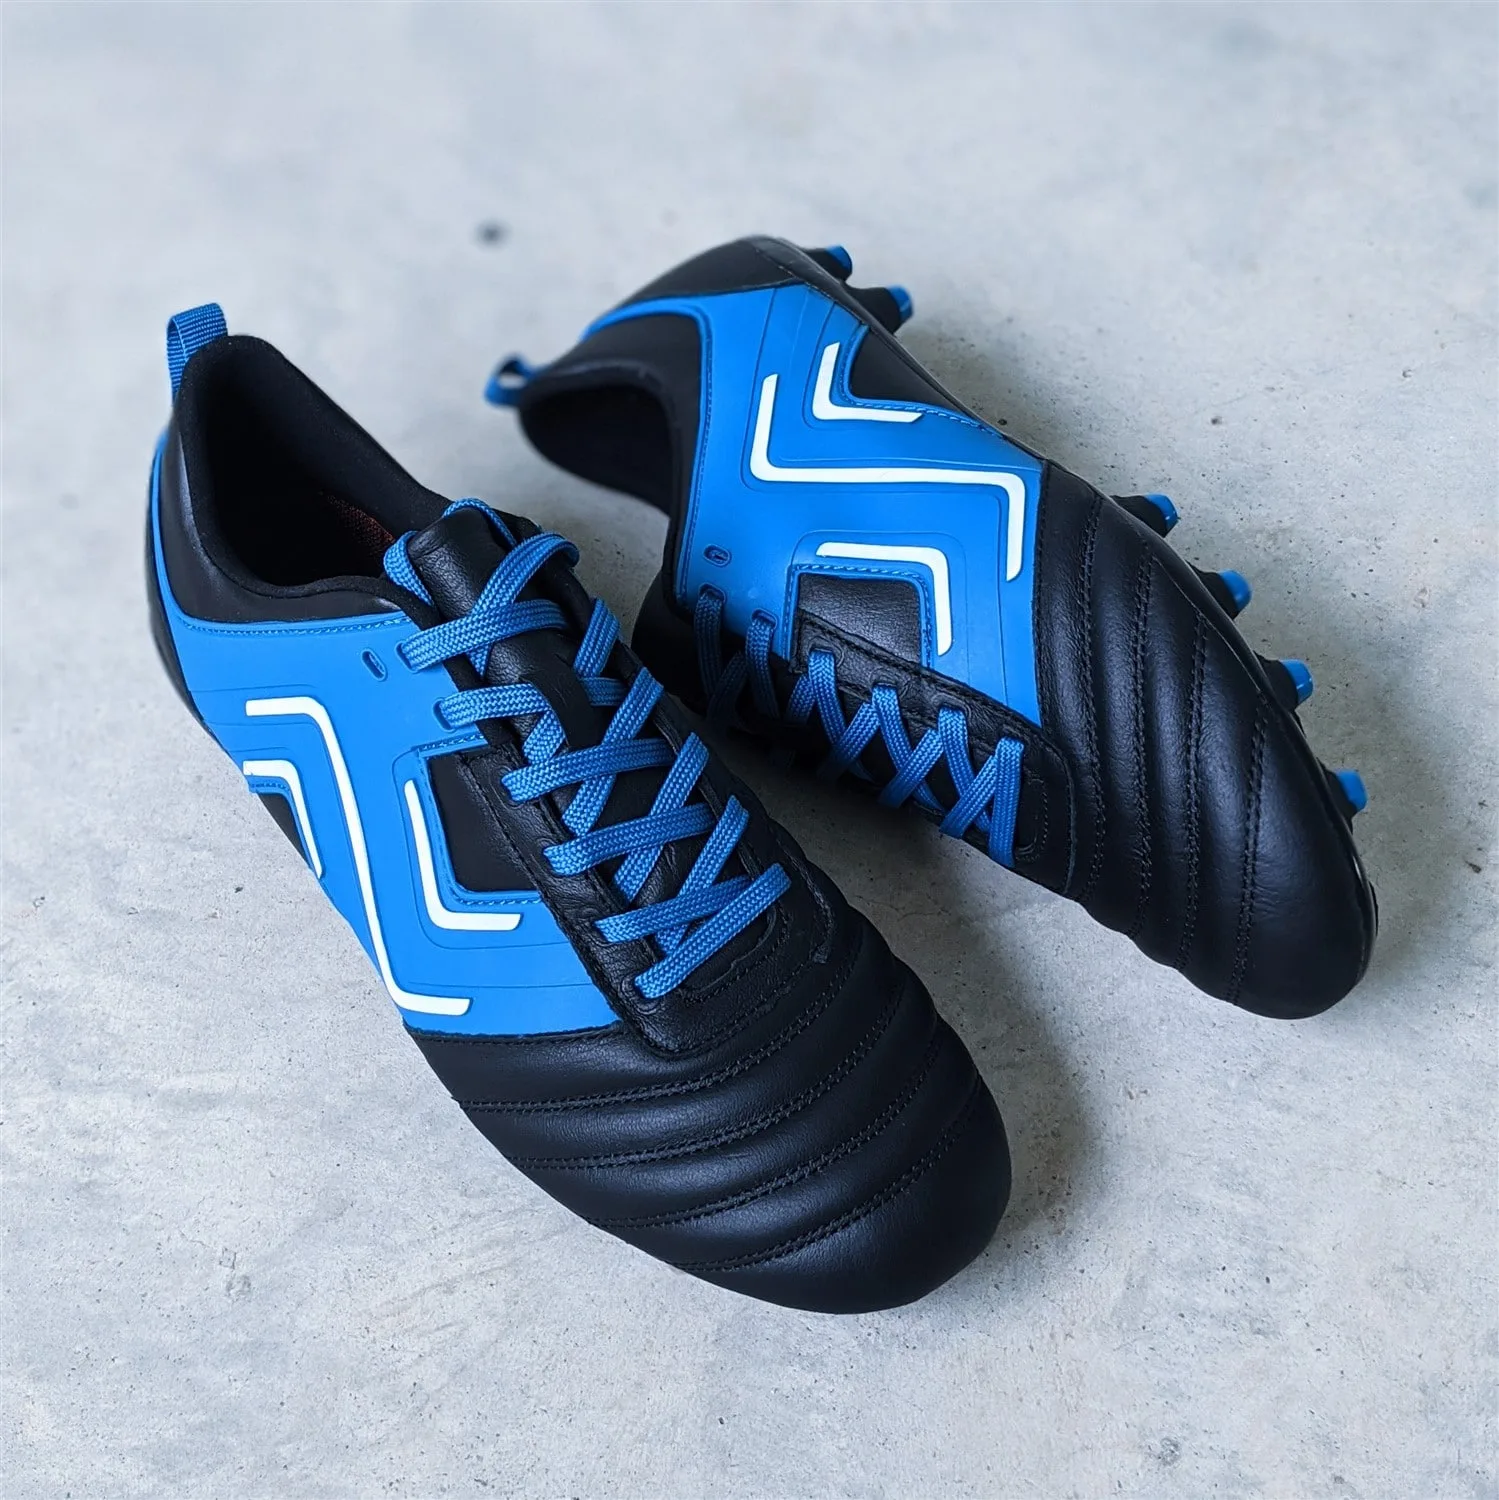 Ida sports football boots soccer cleats for women